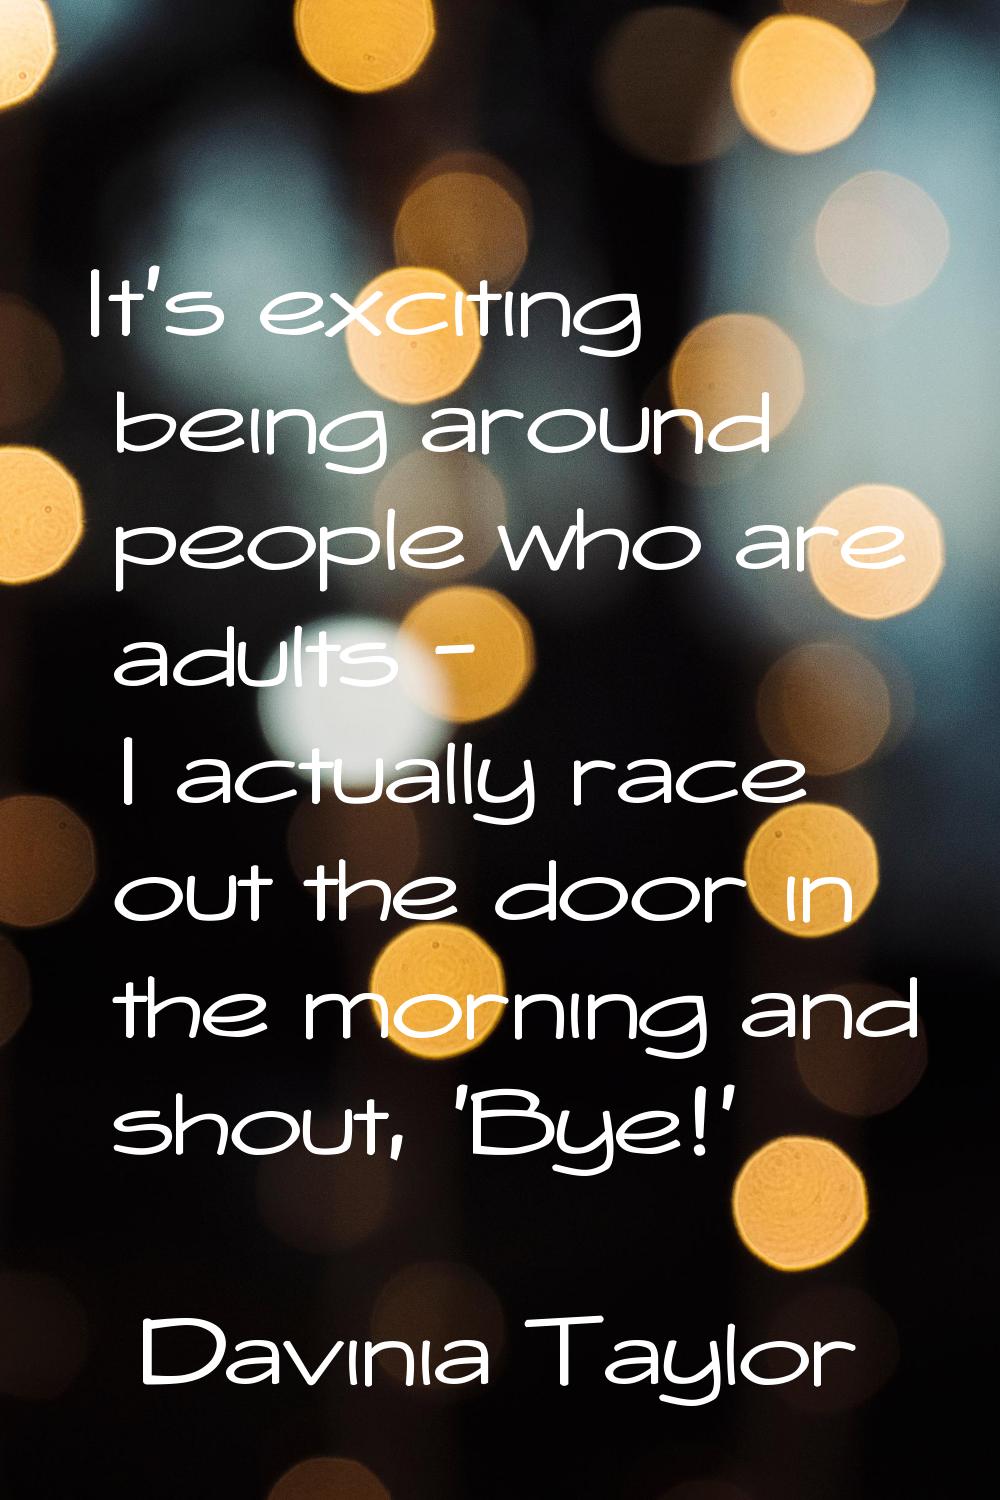 It's exciting being around people who are adults - I actually race out the door in the morning and 